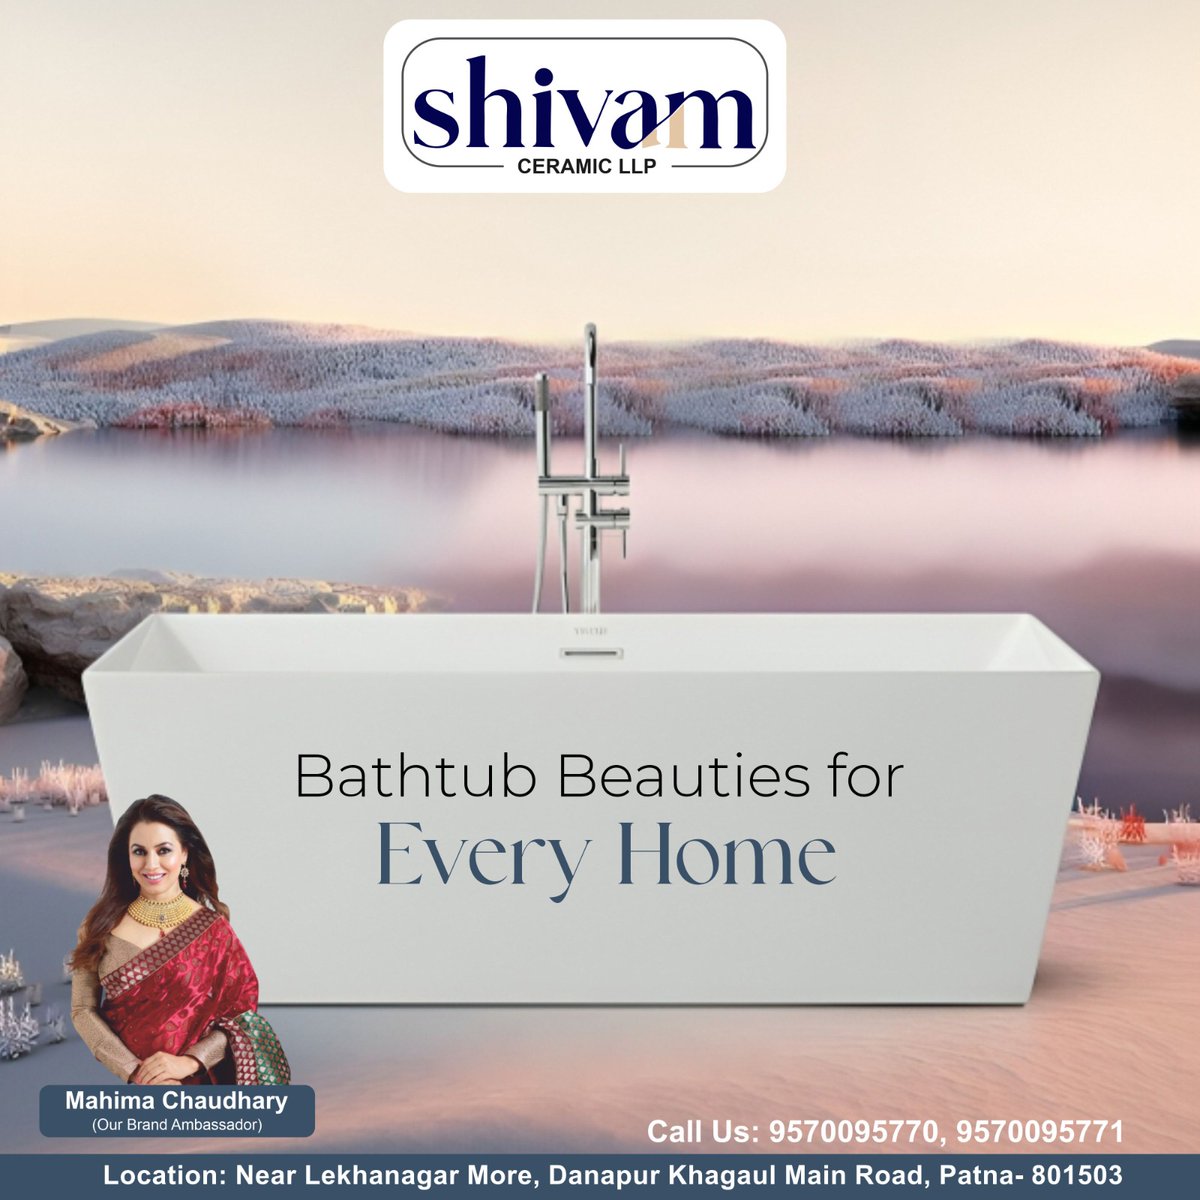 Introducing Shivam Ceramic Bathtubs: the epitome of elegance and luxury for every home. Elevate your bathing experience with our exquisite designs and superior craftsmanship.

#HomeSpa #LuxuryLiving #BathroomGoals #ShivamCeramic #BathtubBeauties